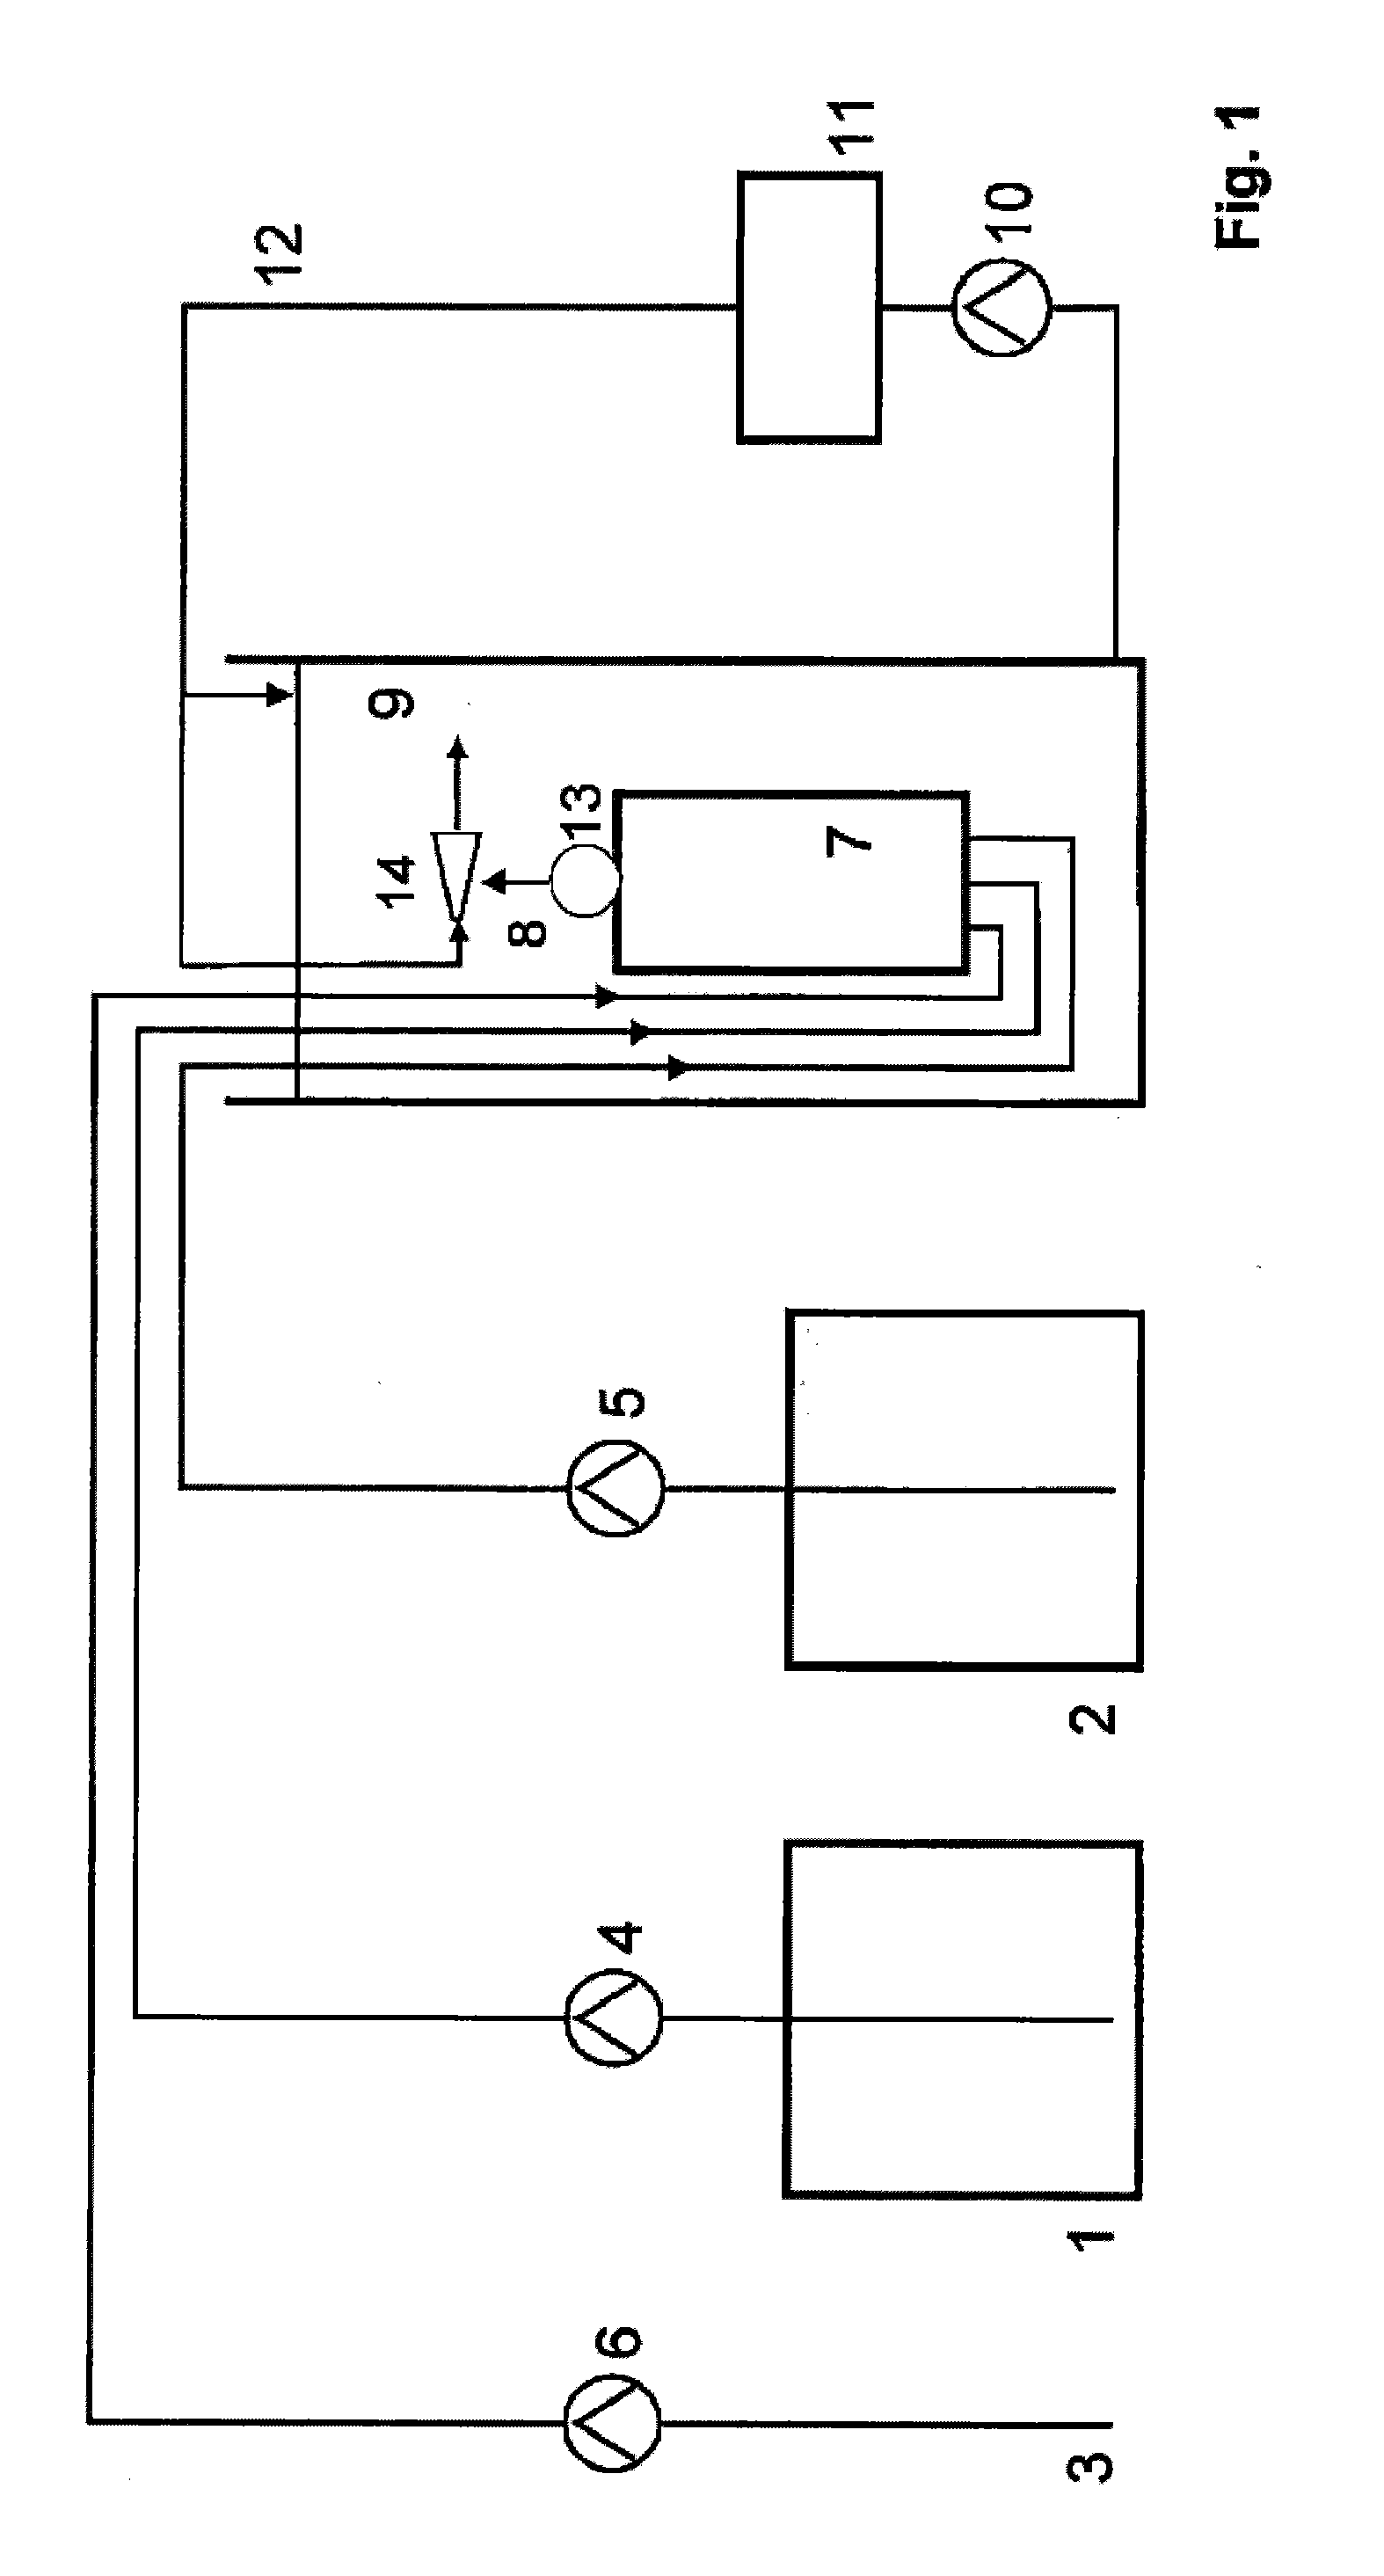 Method of treating water with chlorine dioxide